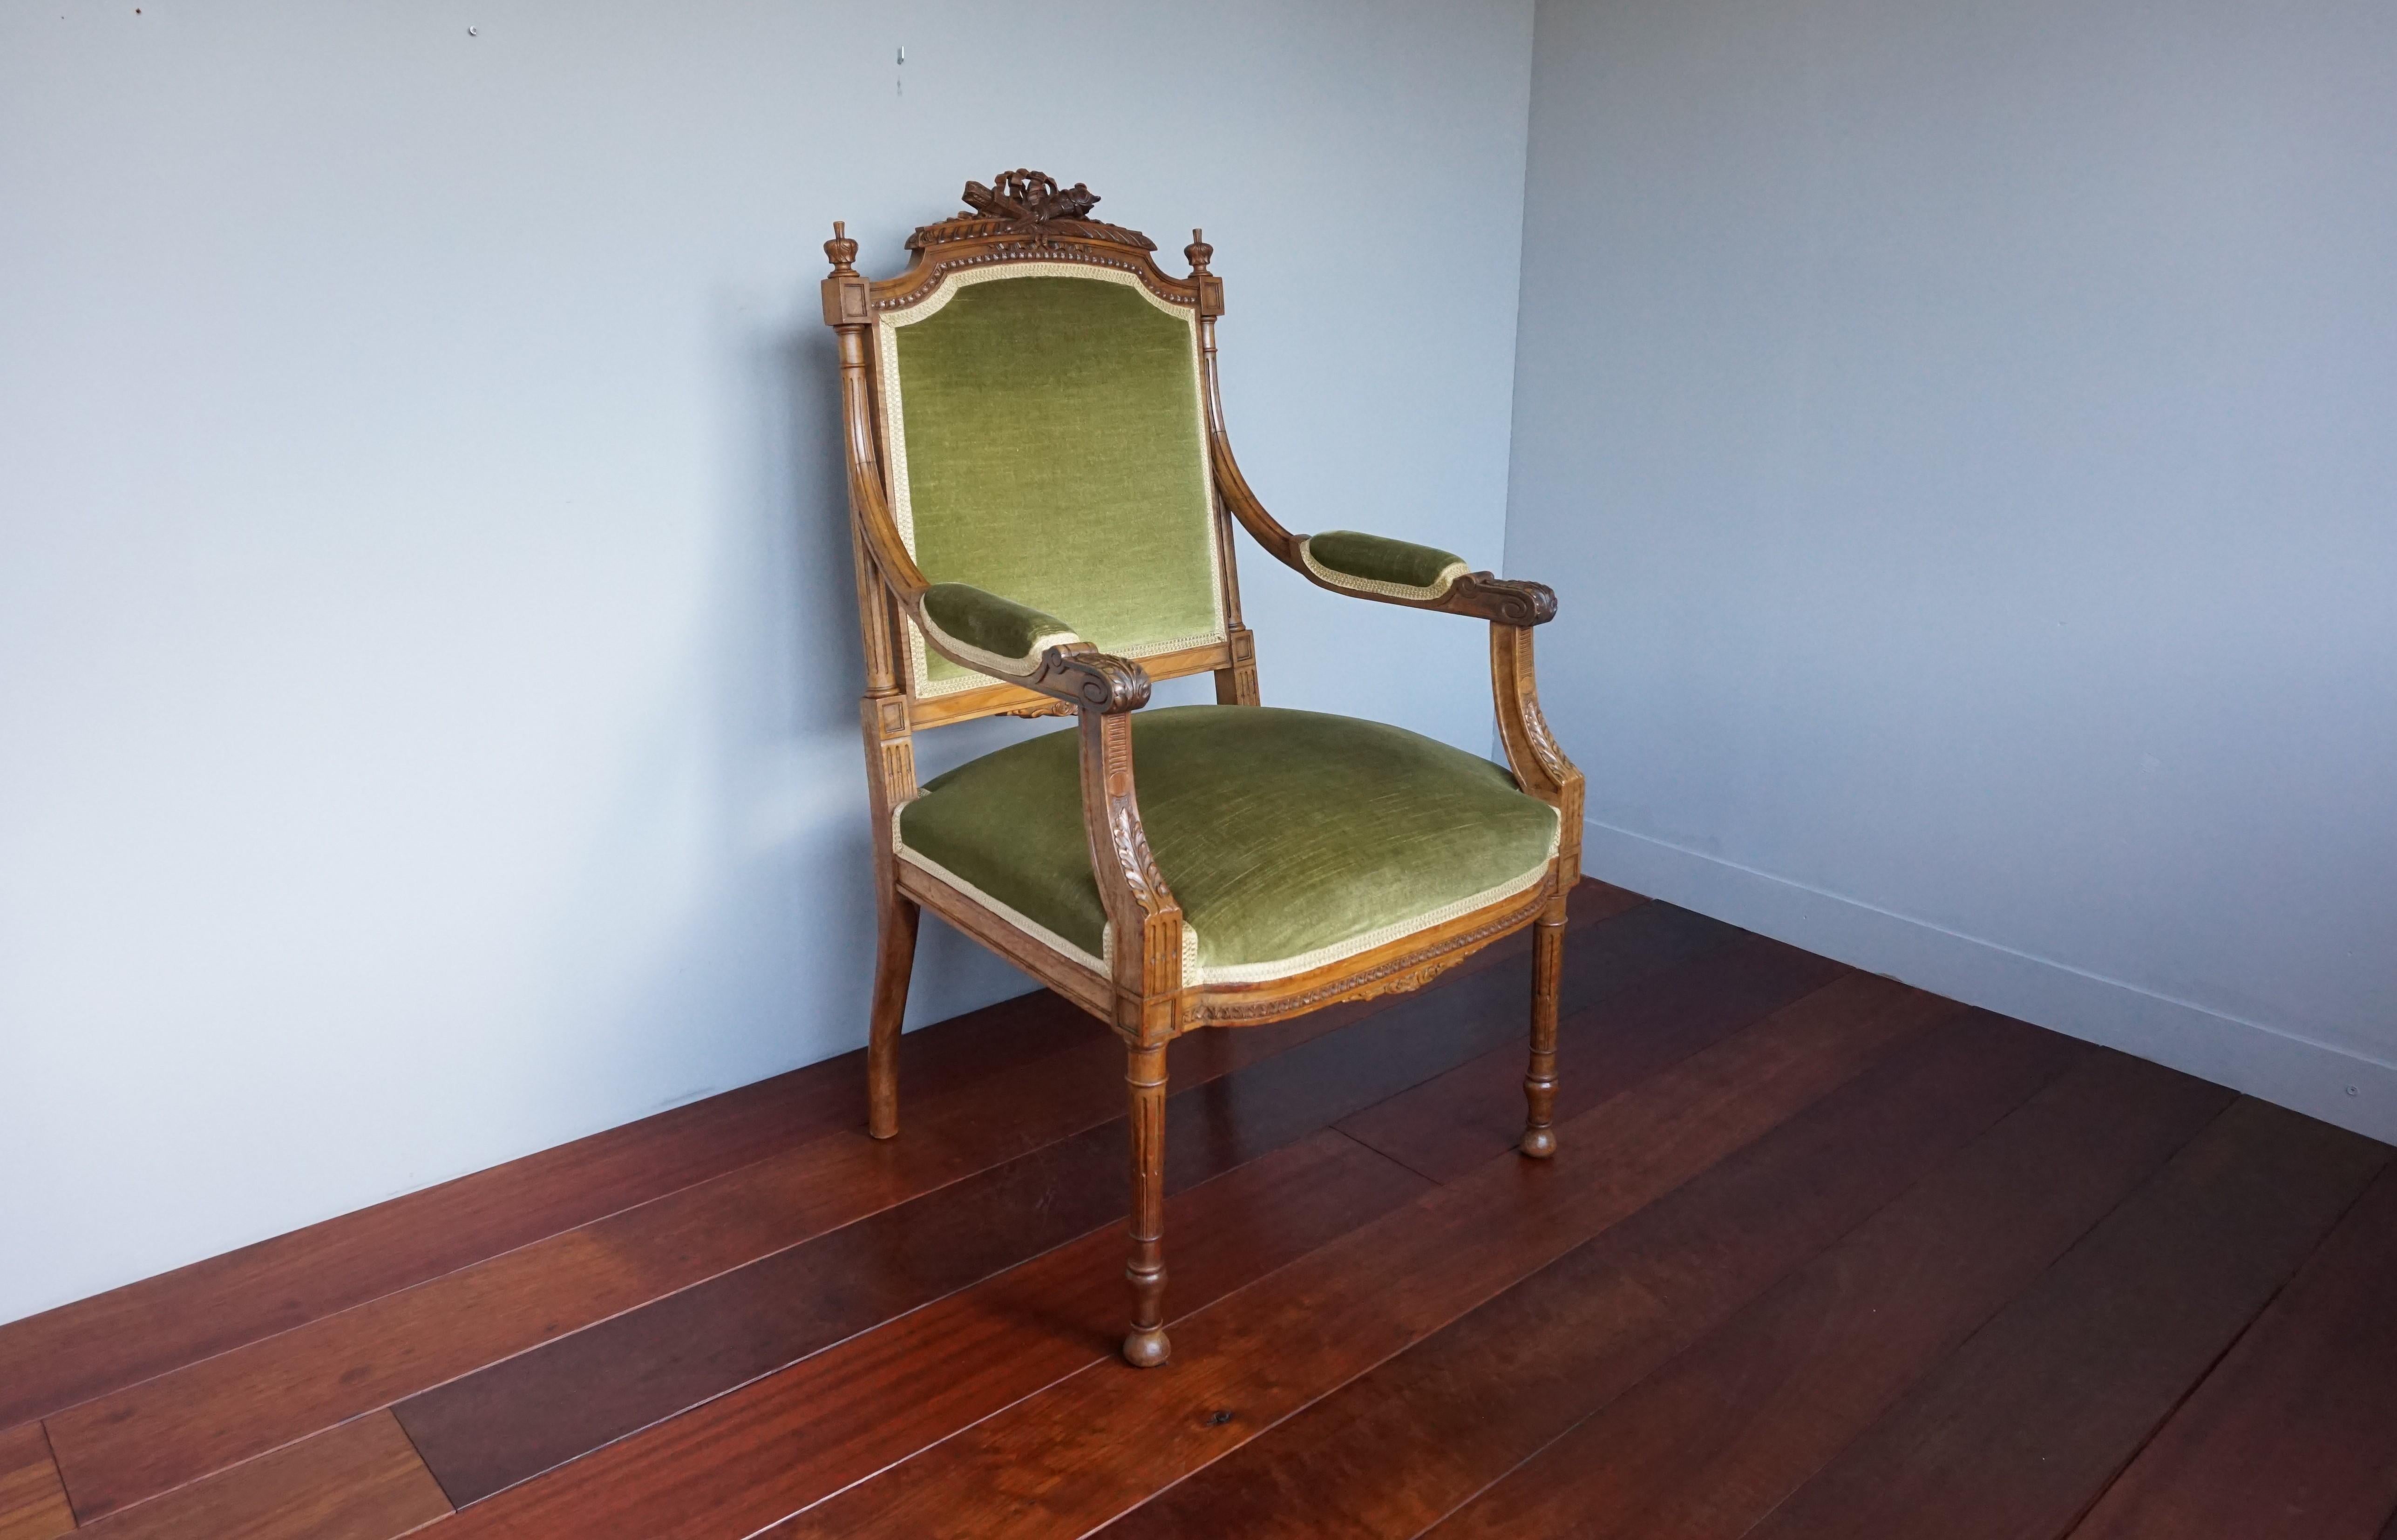 Stylish and very comfortable antique chair with perfect upholstery.

If you are looking for an incredibly well handcrafted antique chair to grace your living space then this striking specimen could be perfect for you. We cannot think of a better